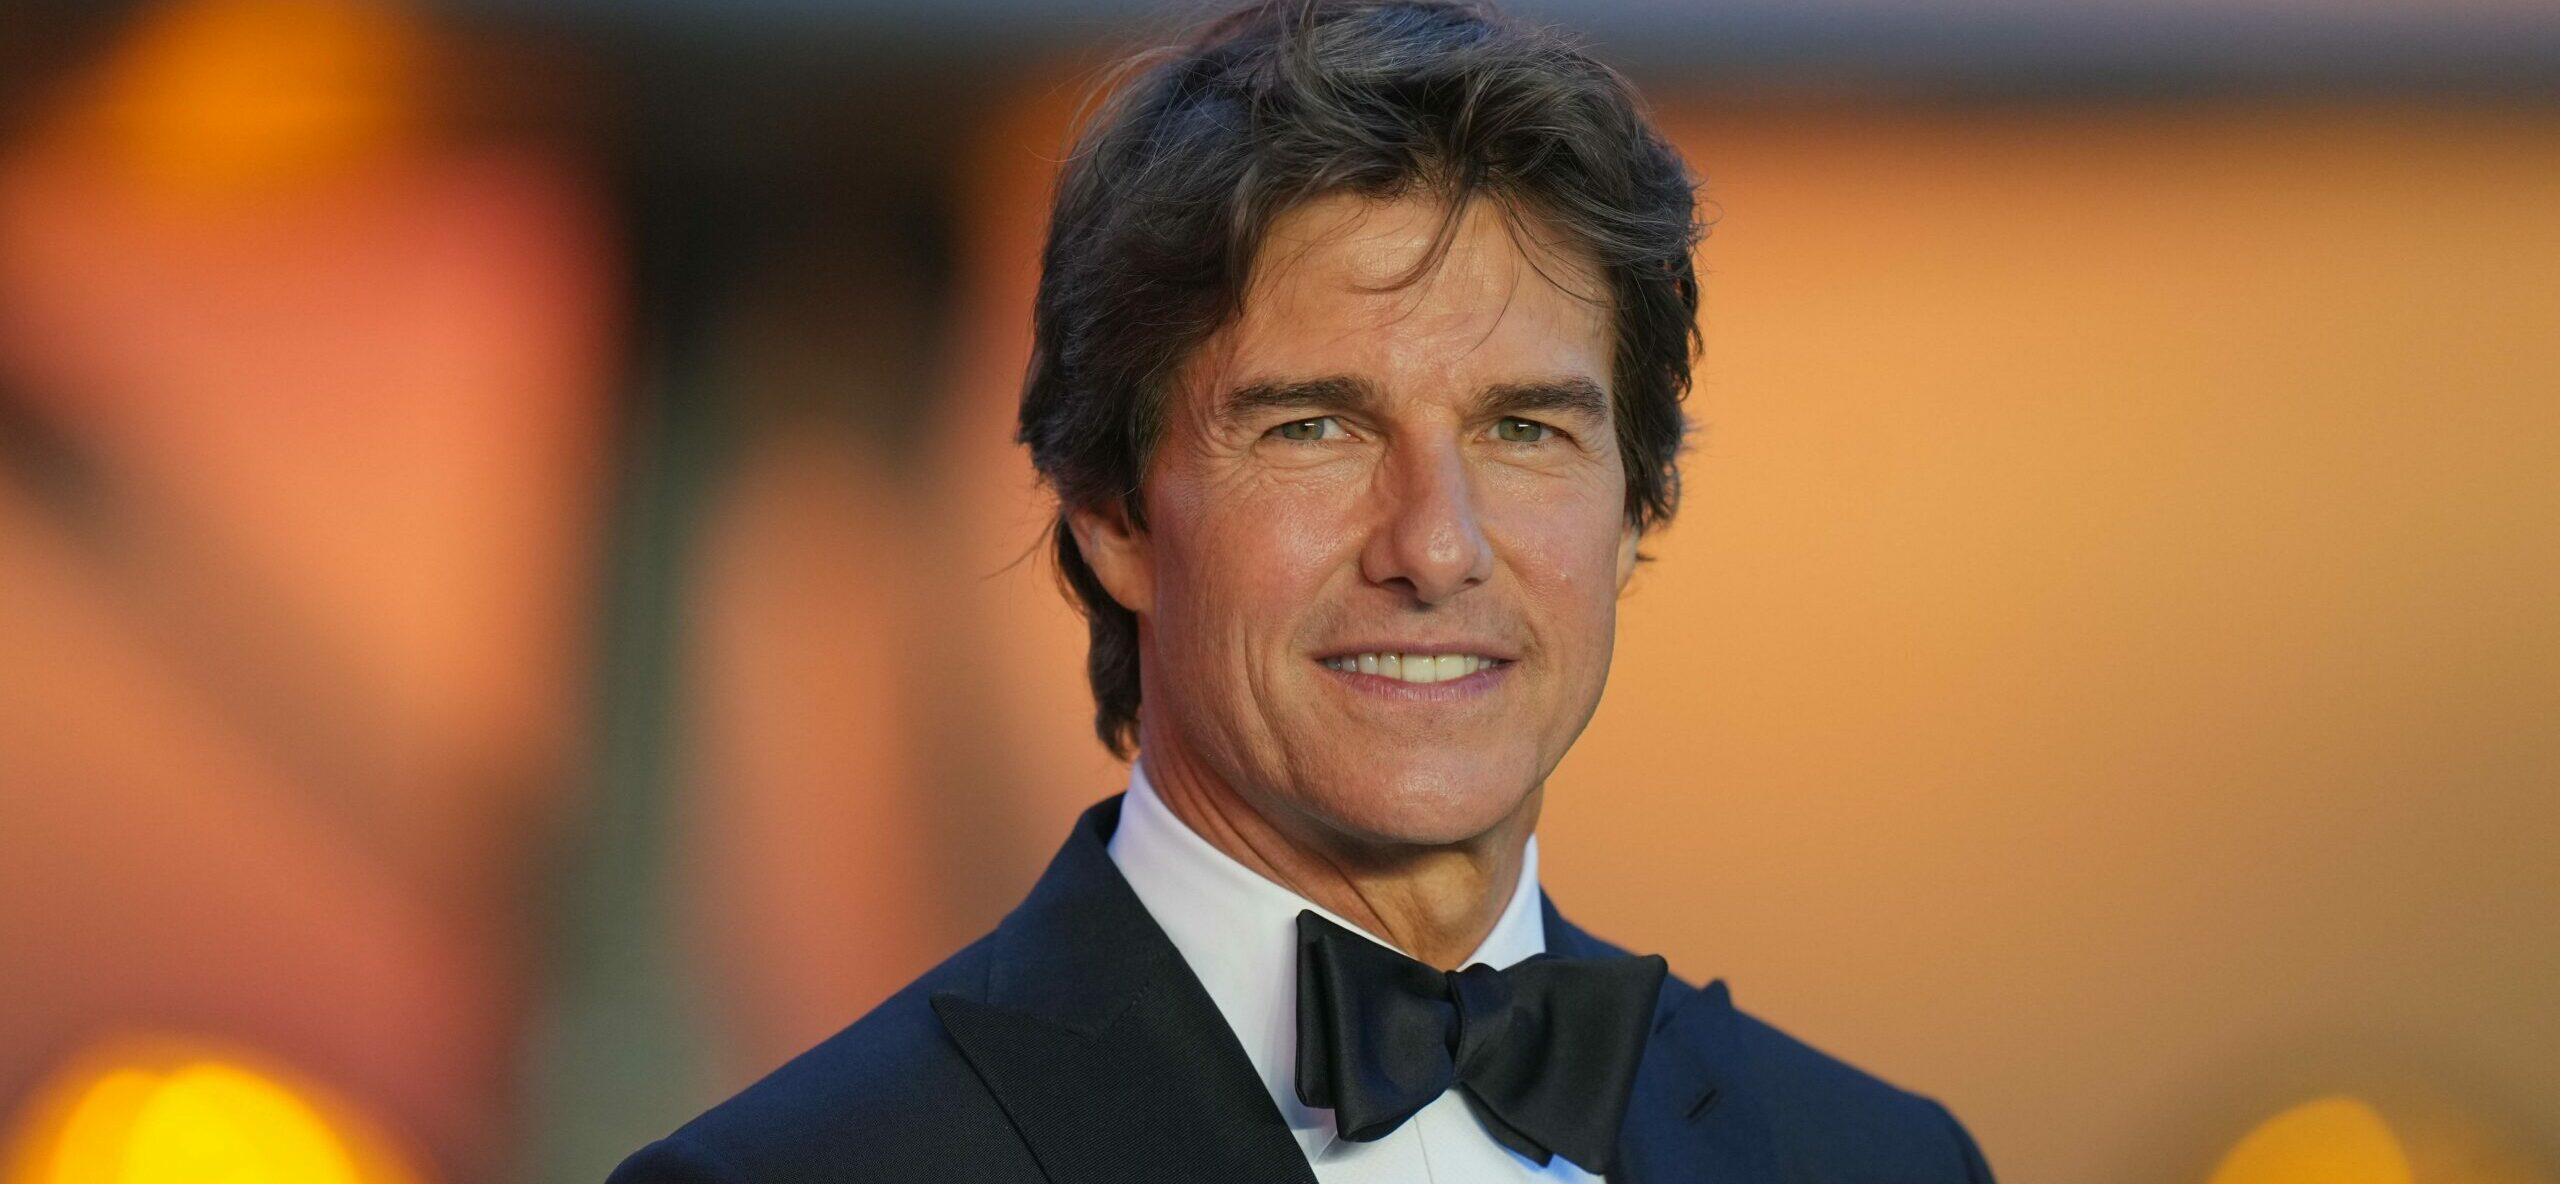 Tom Cruise To Film His Next Big Action Movie In Outer Space